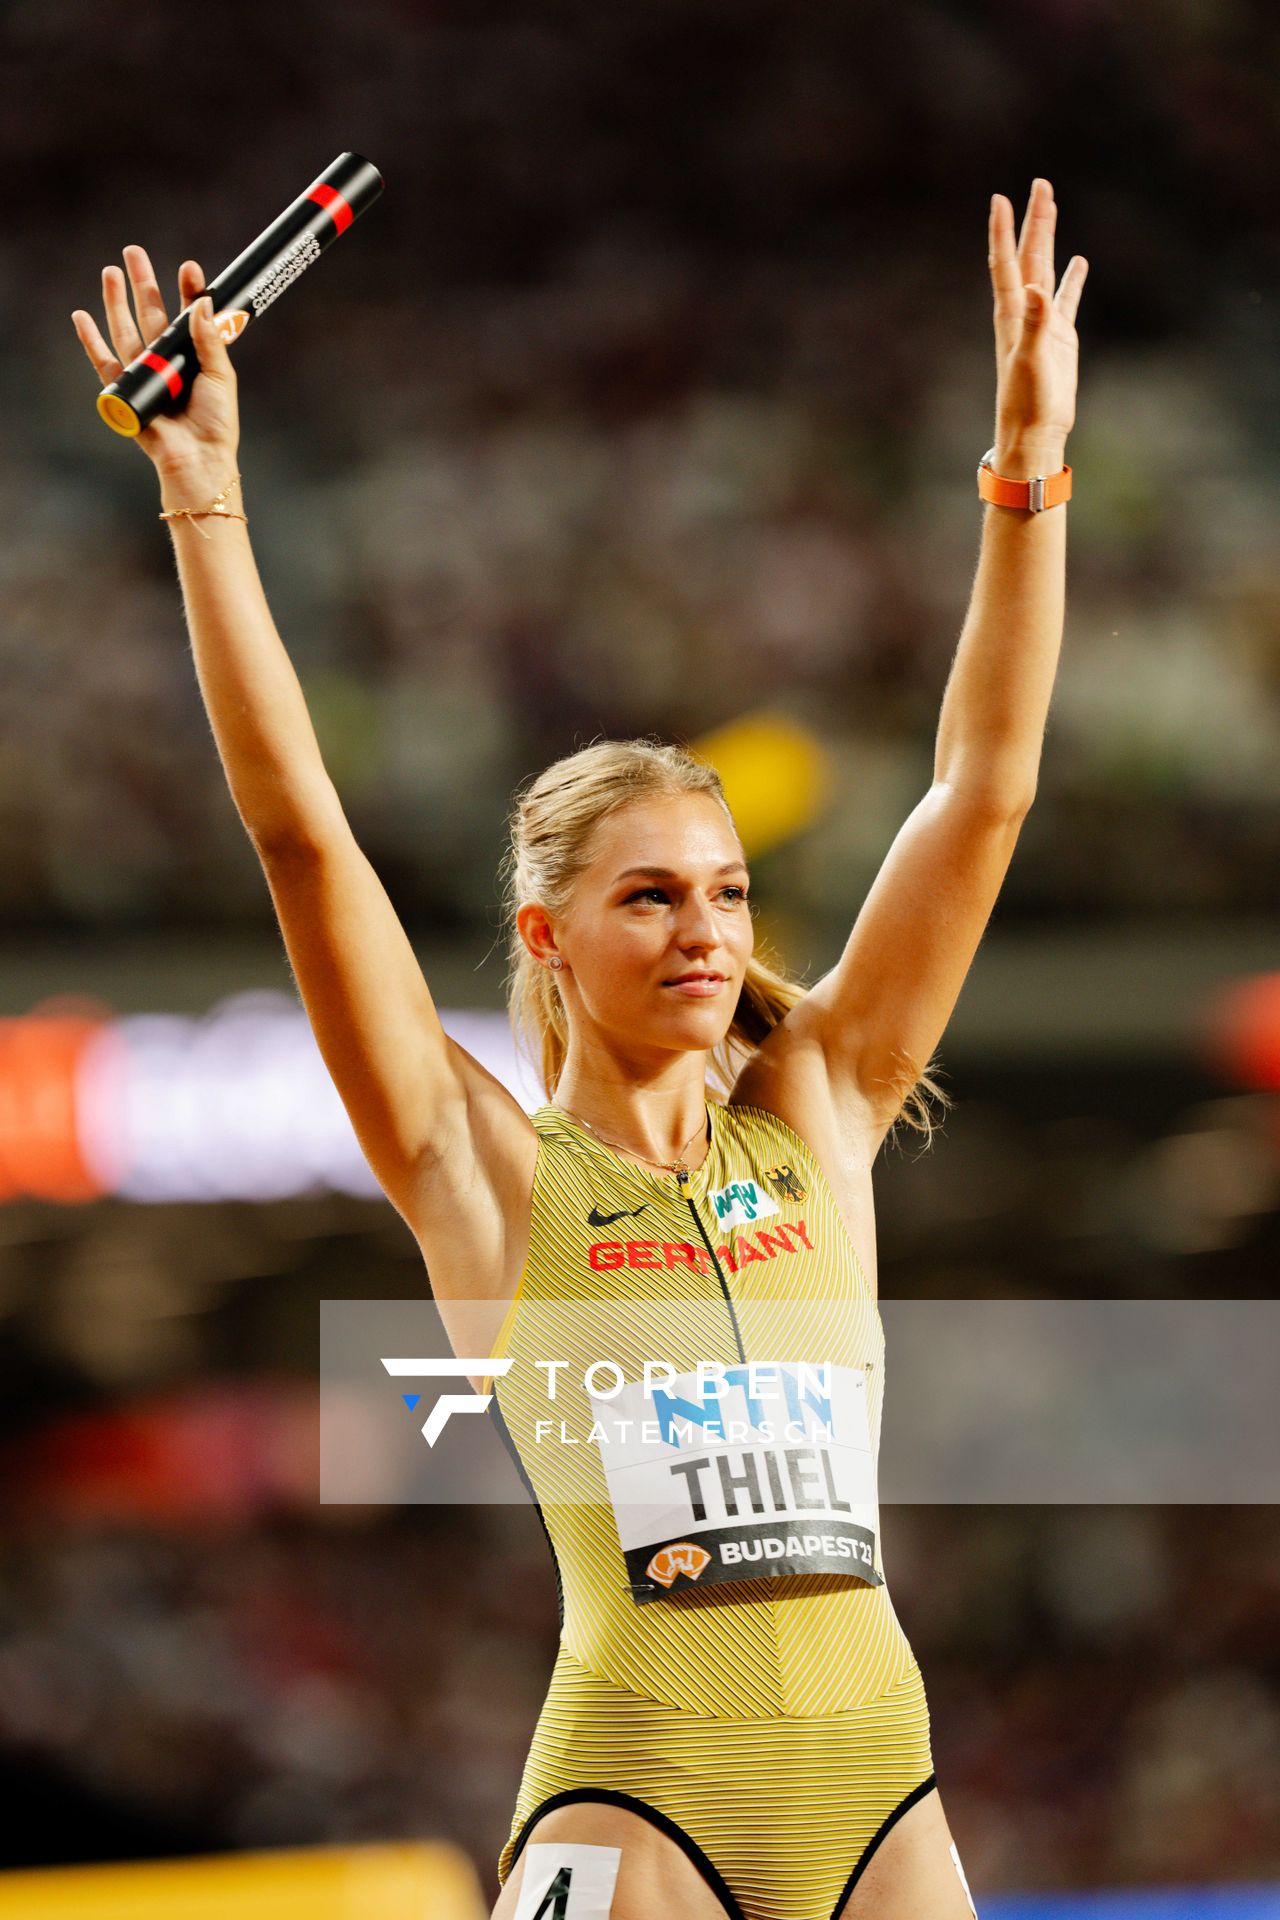 Luna Thiel (GER/Germany) during the 4x400 Metres Relay on Day 8 of the World Athletics Championships Budapest 23 at the National Athletics Centre in Budapest, Hungary on August 26, 2023.